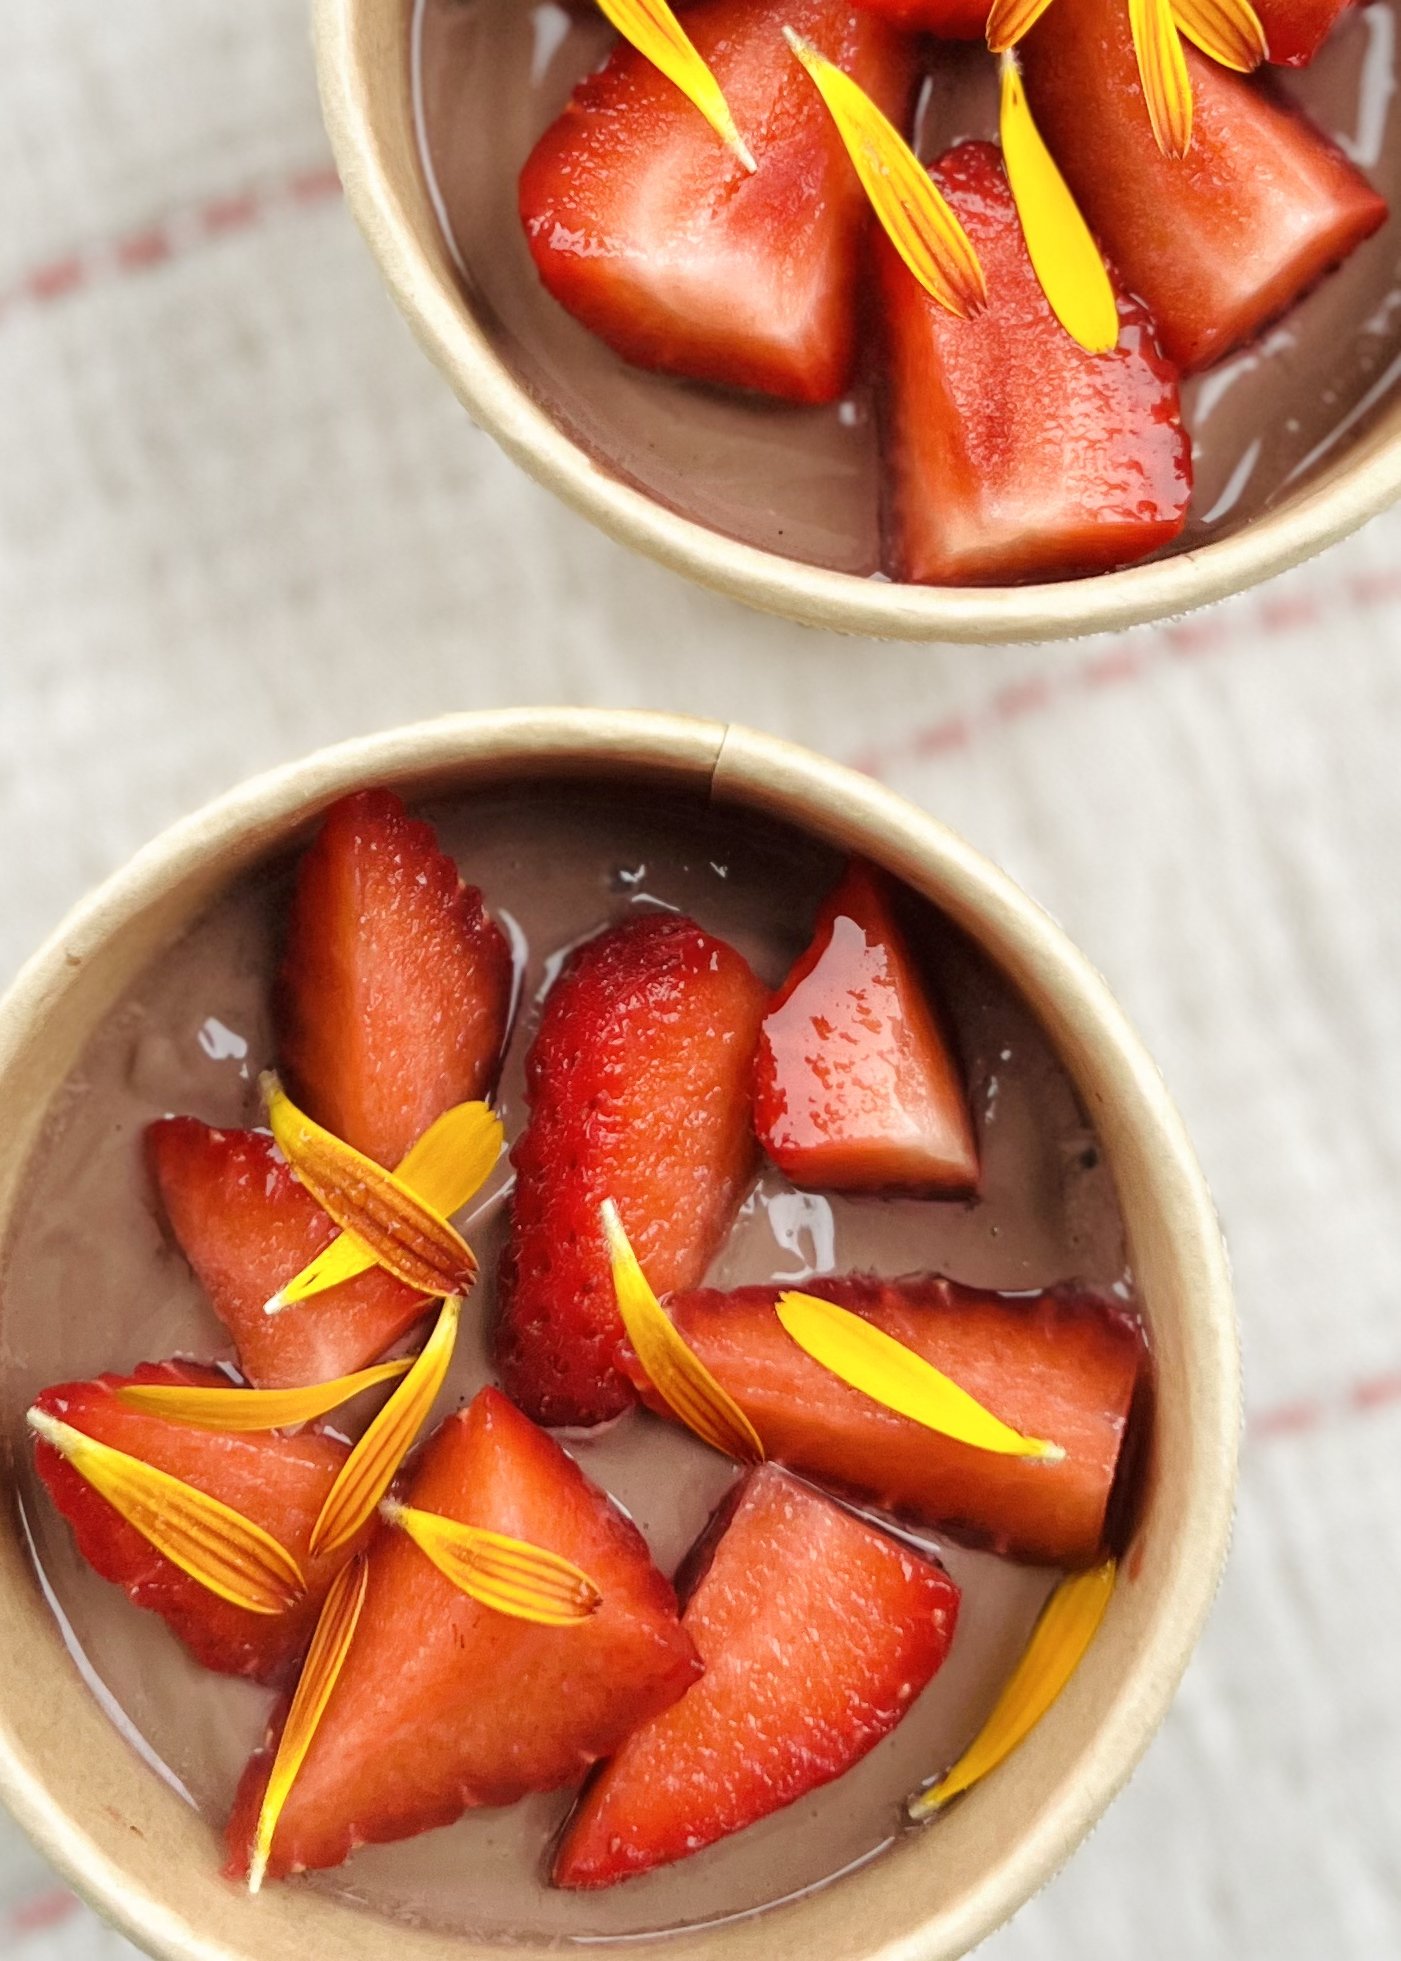 choc mousse with strawberries.jpg